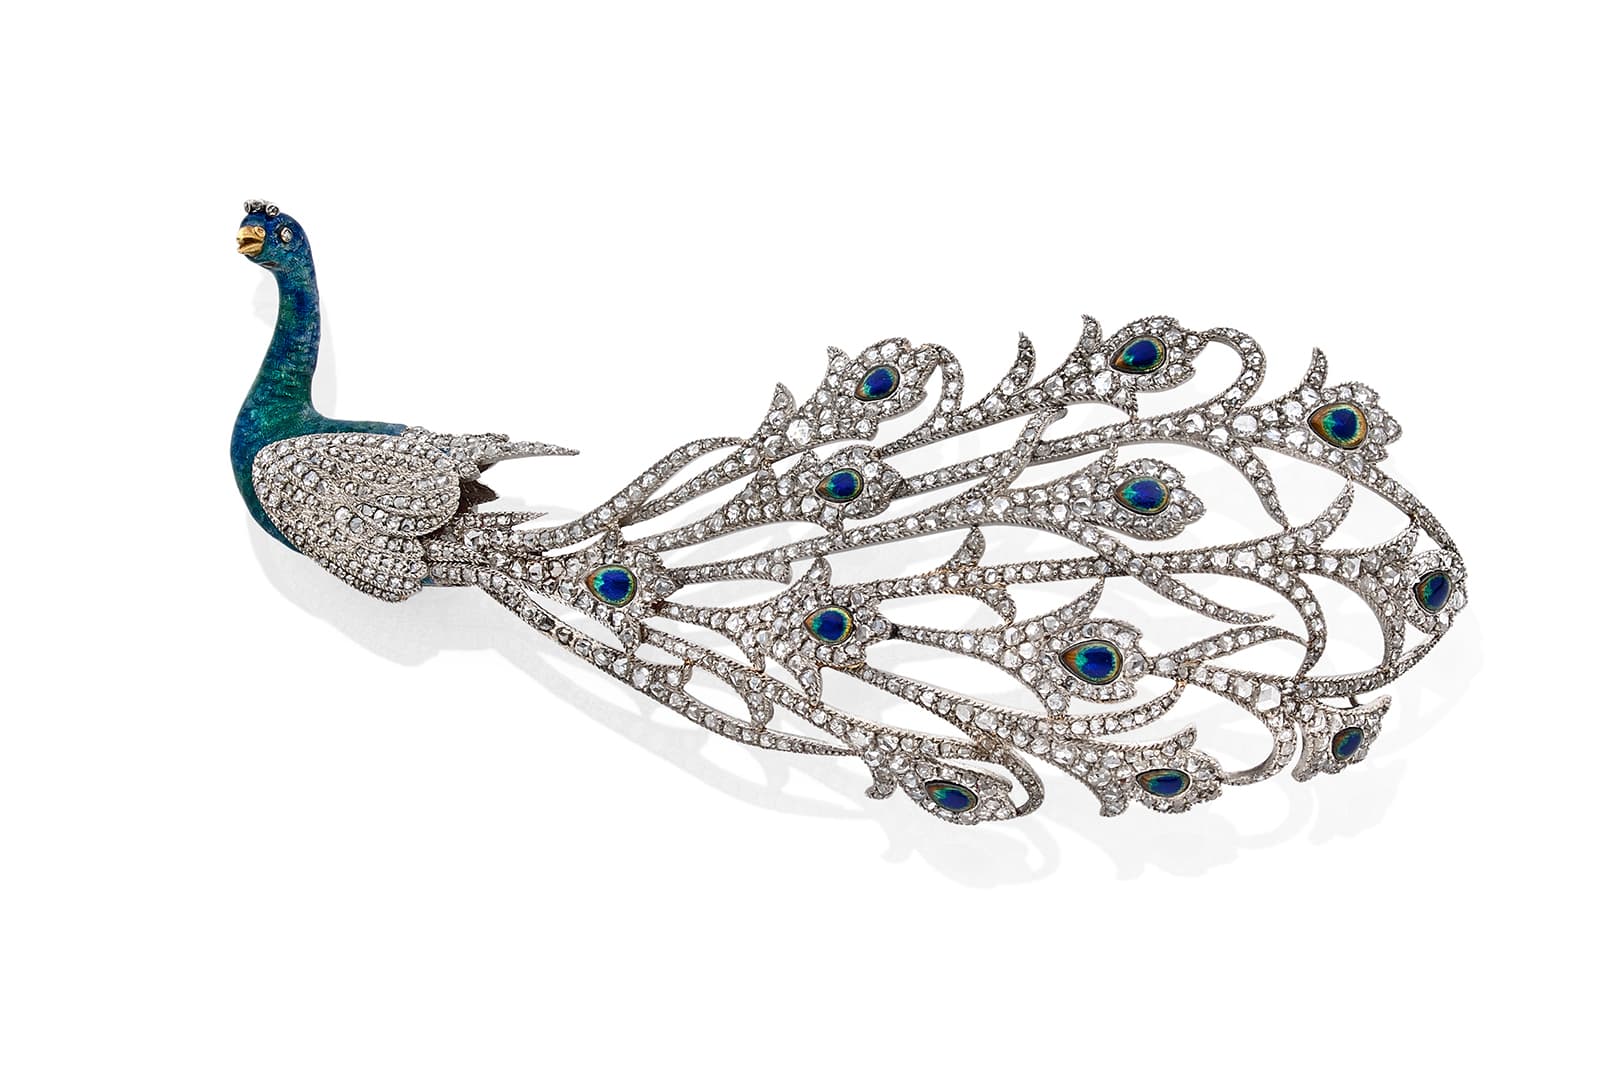 Charles Mellerio peacock brooch with diamonds and enamel circa 1910